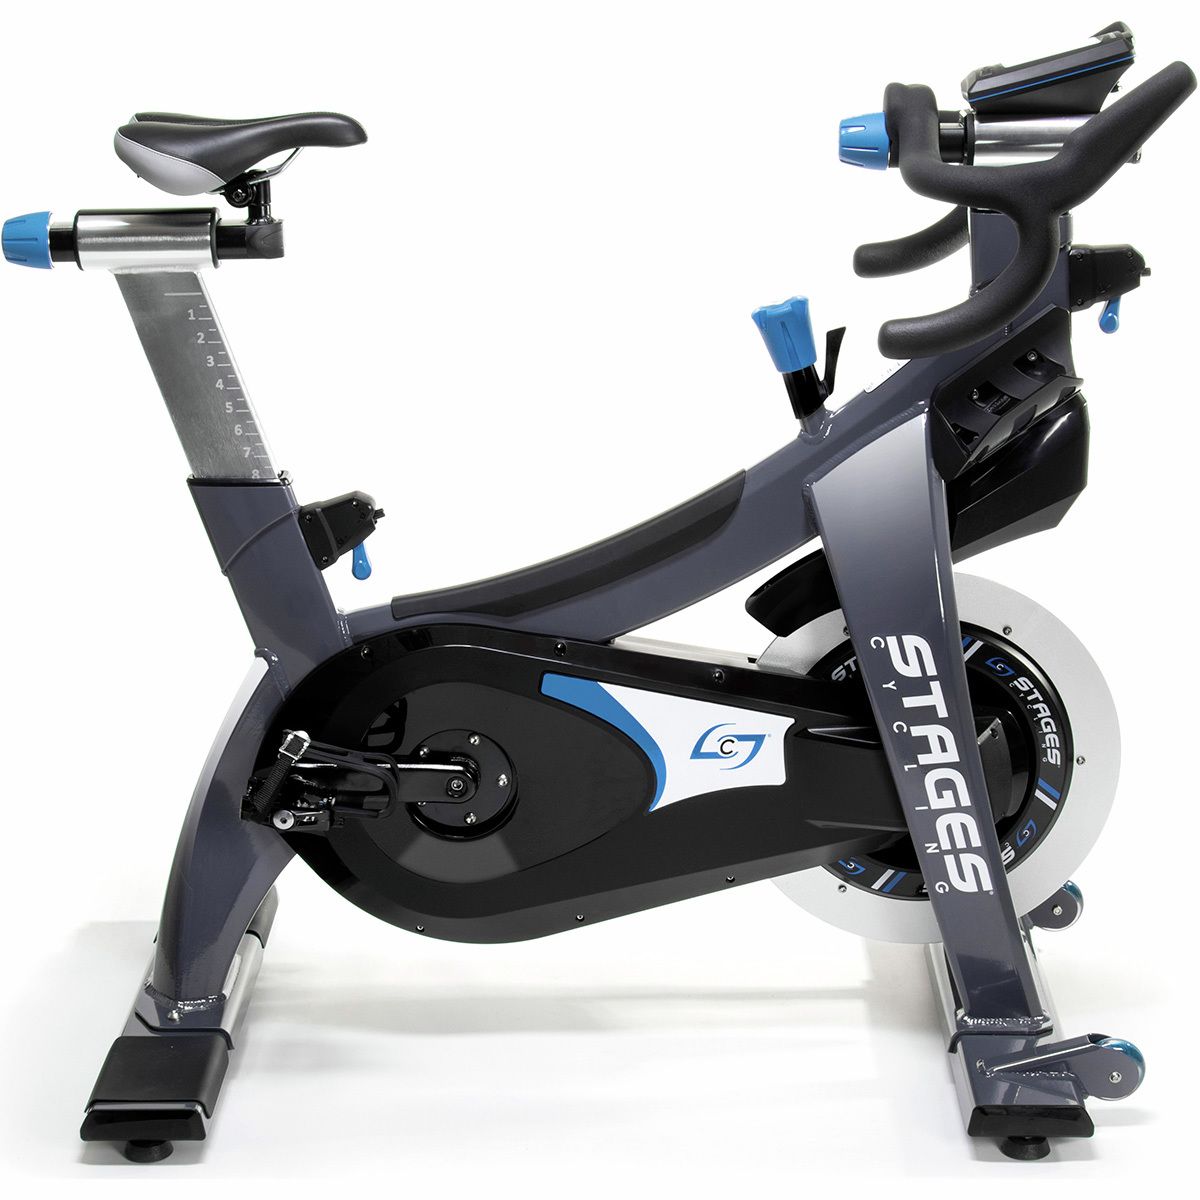 Stages Cycling SC3 Indoor Bike